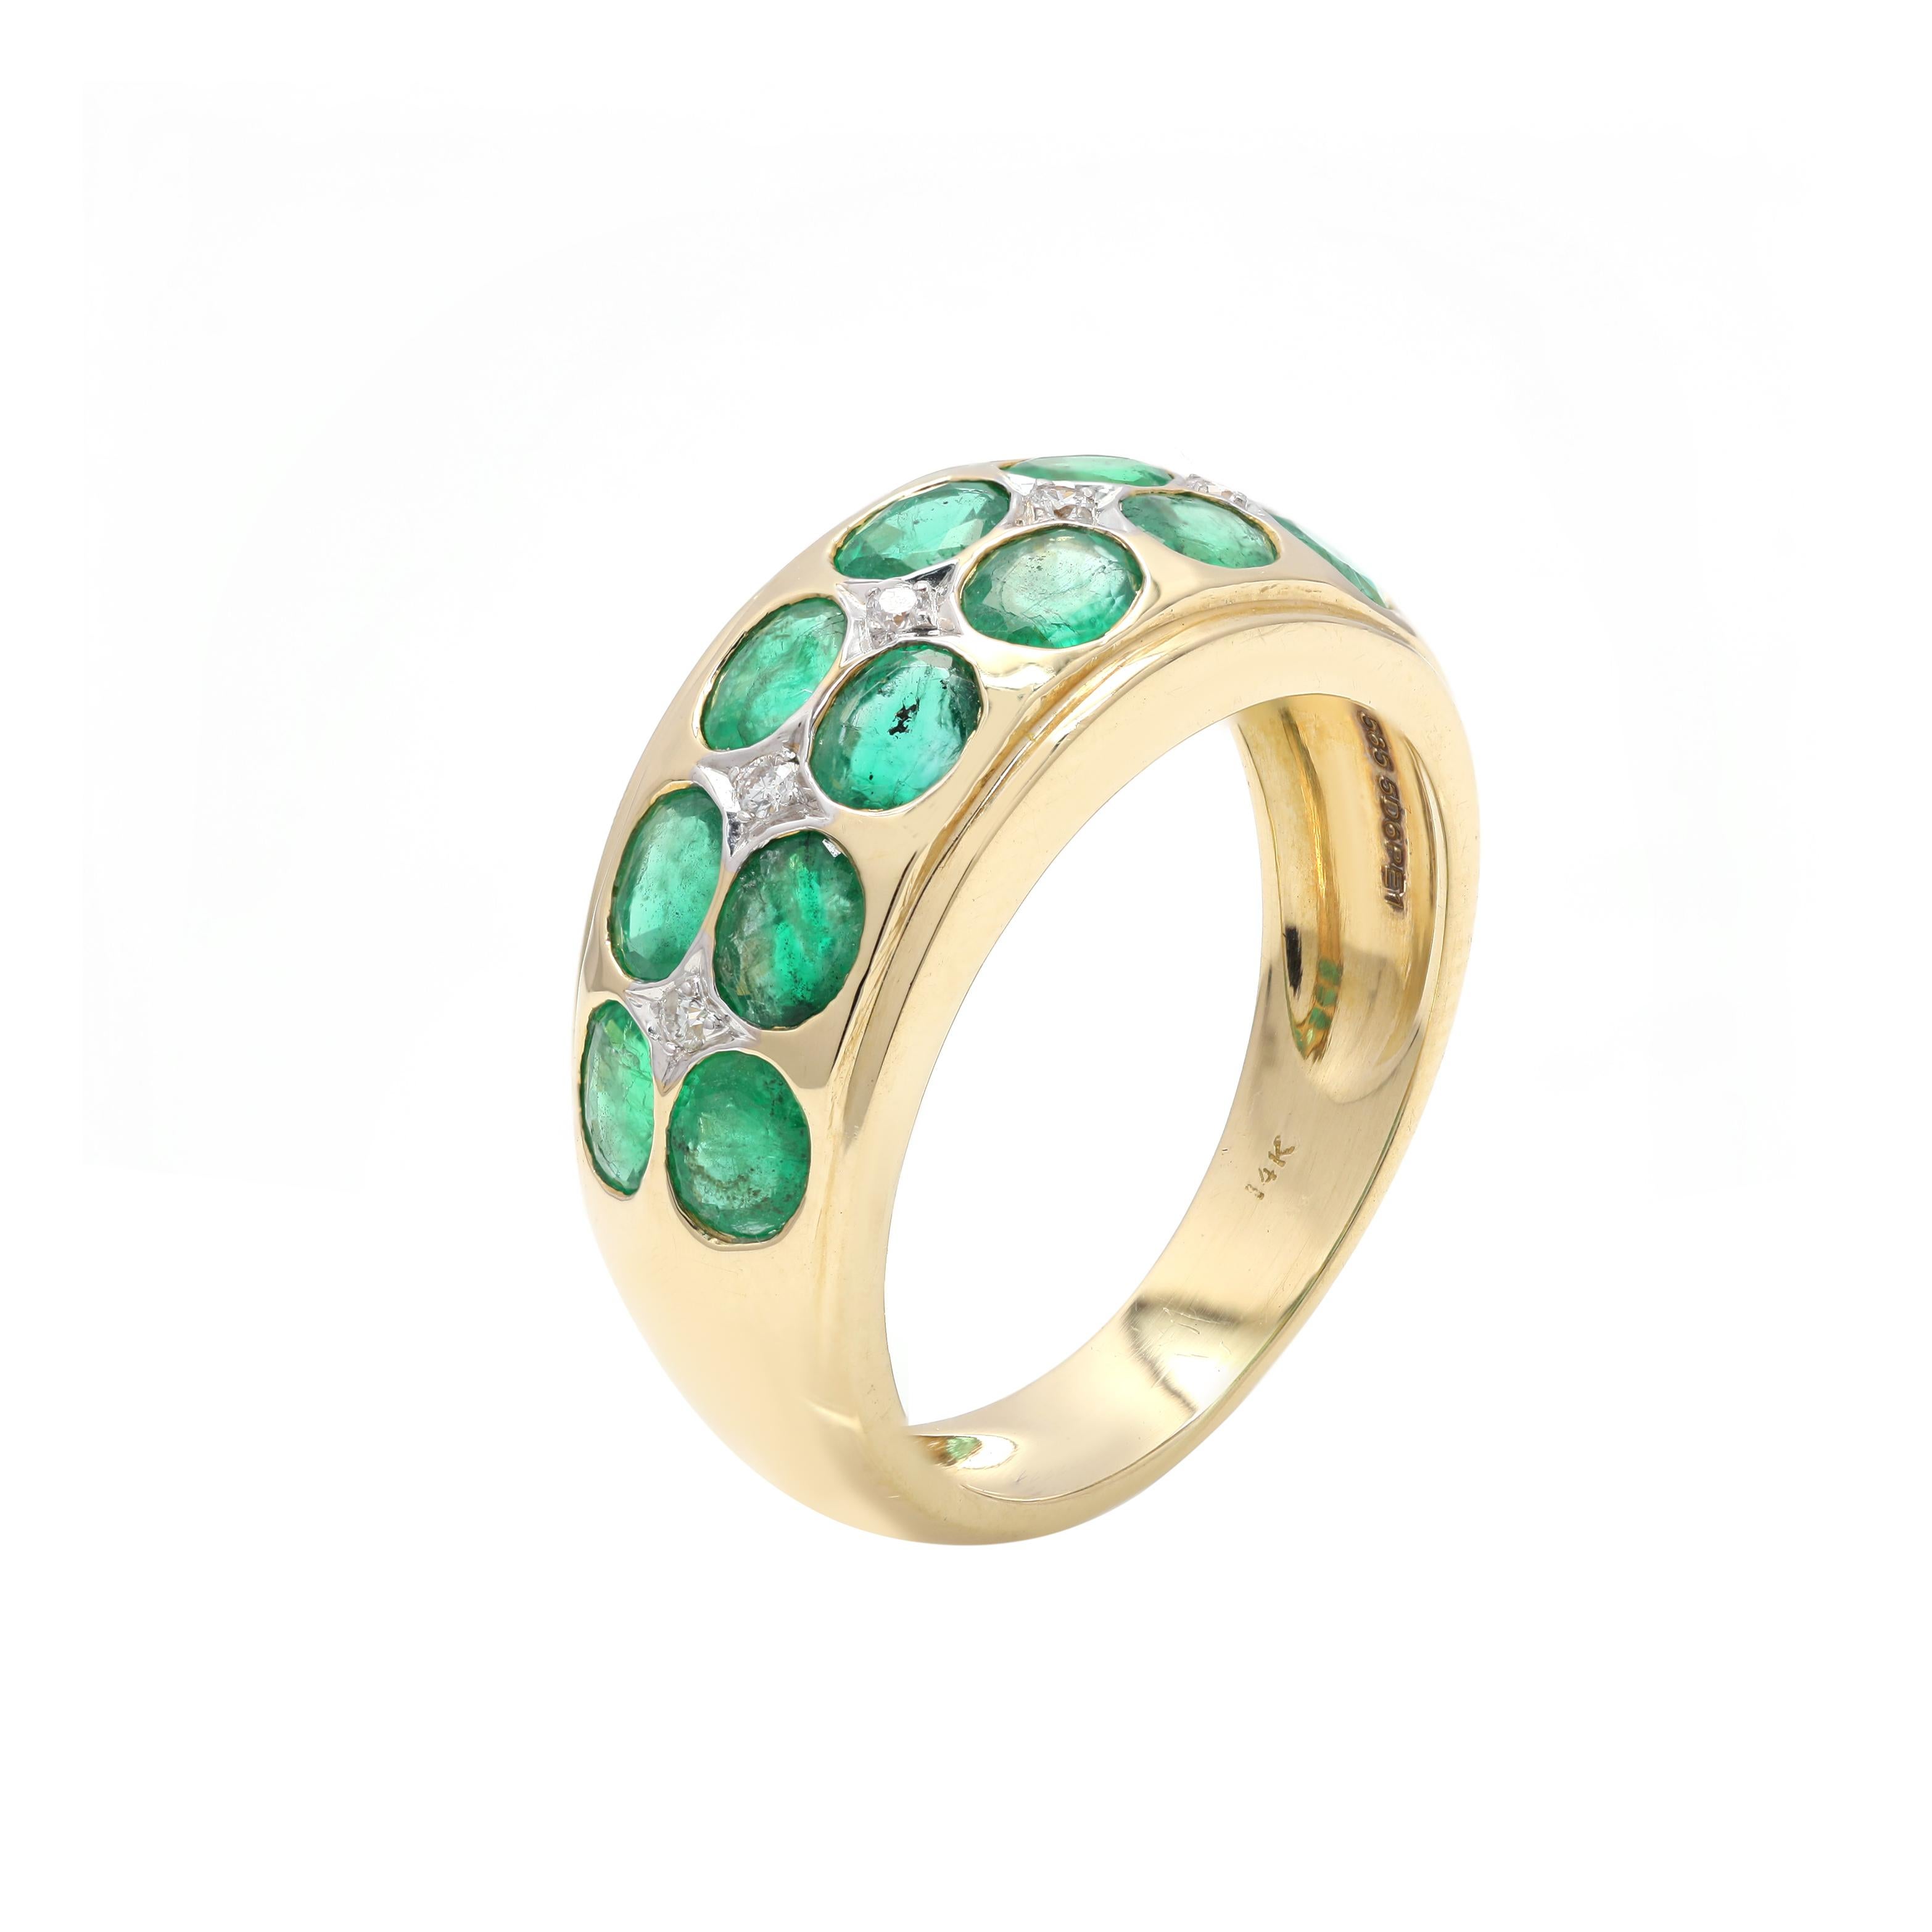 For Sale:  Natural 2.3 ct Emerald Band Ring with Diamonds Inlaid in 14K Yellow Gold 2